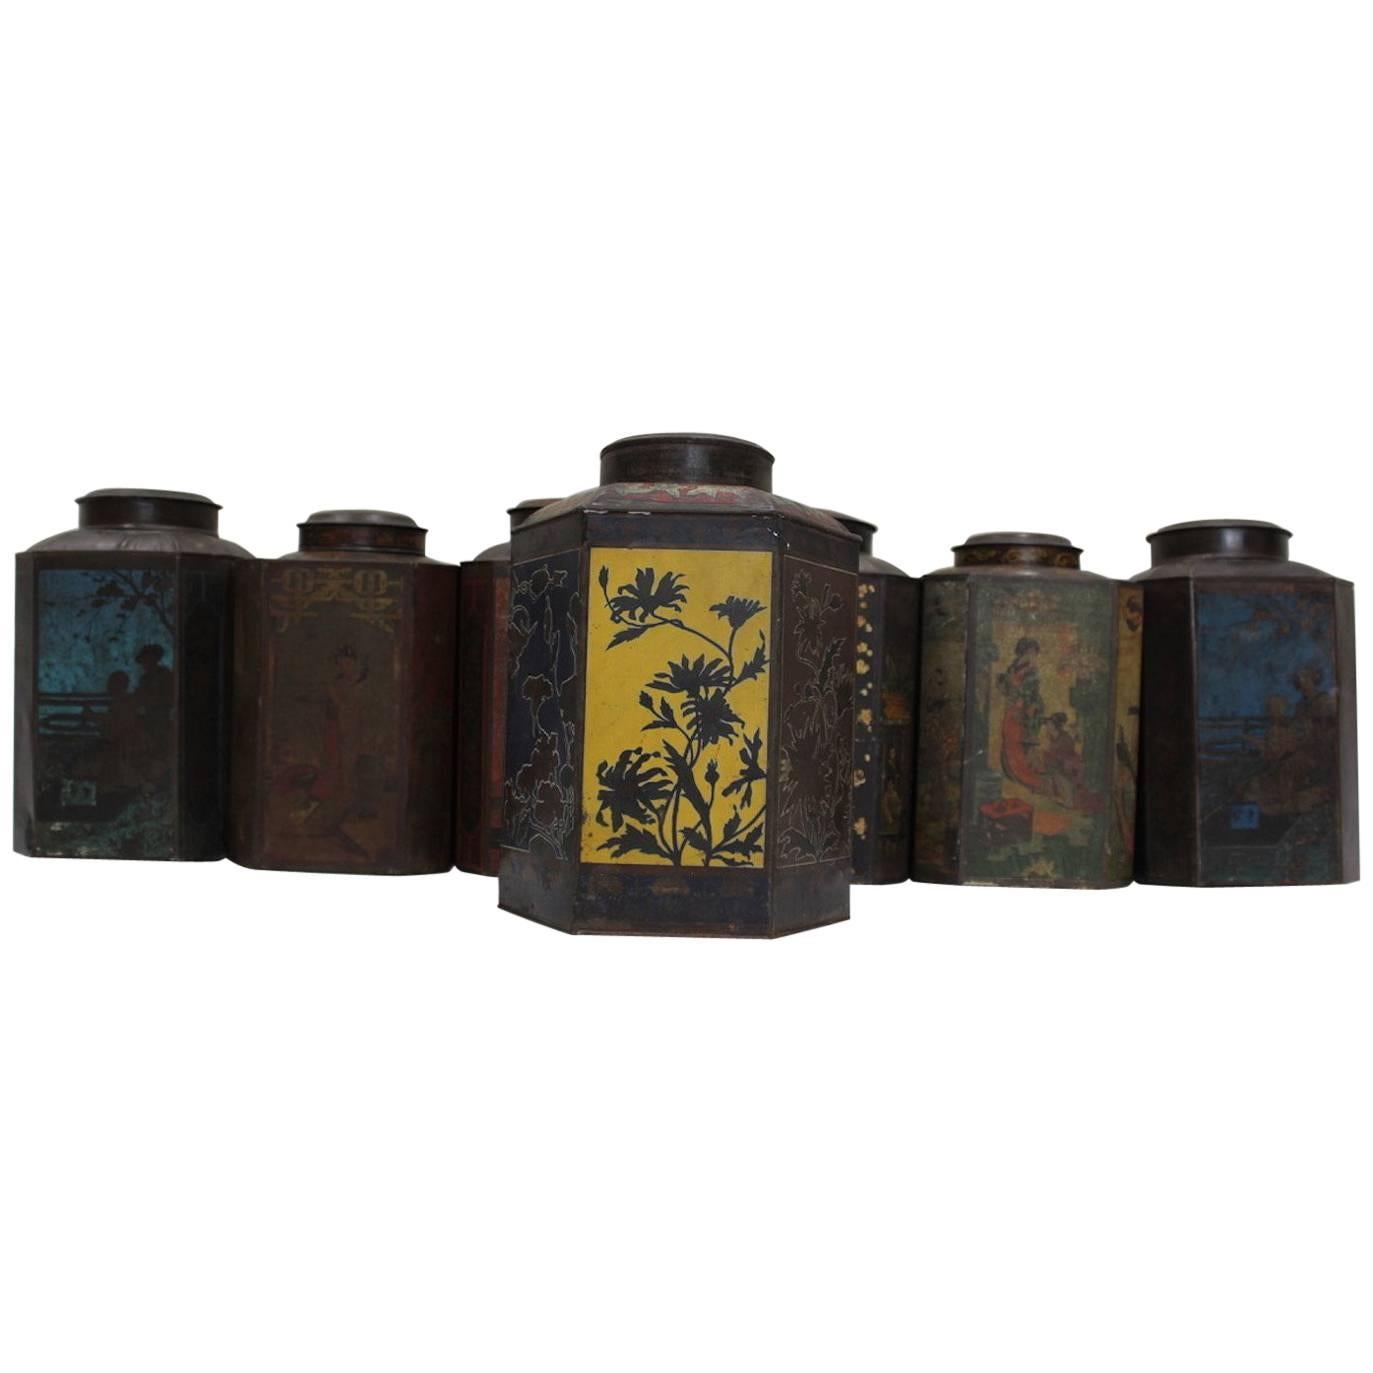 Set of Seven Early 20th Century Dutch Tea Canisters